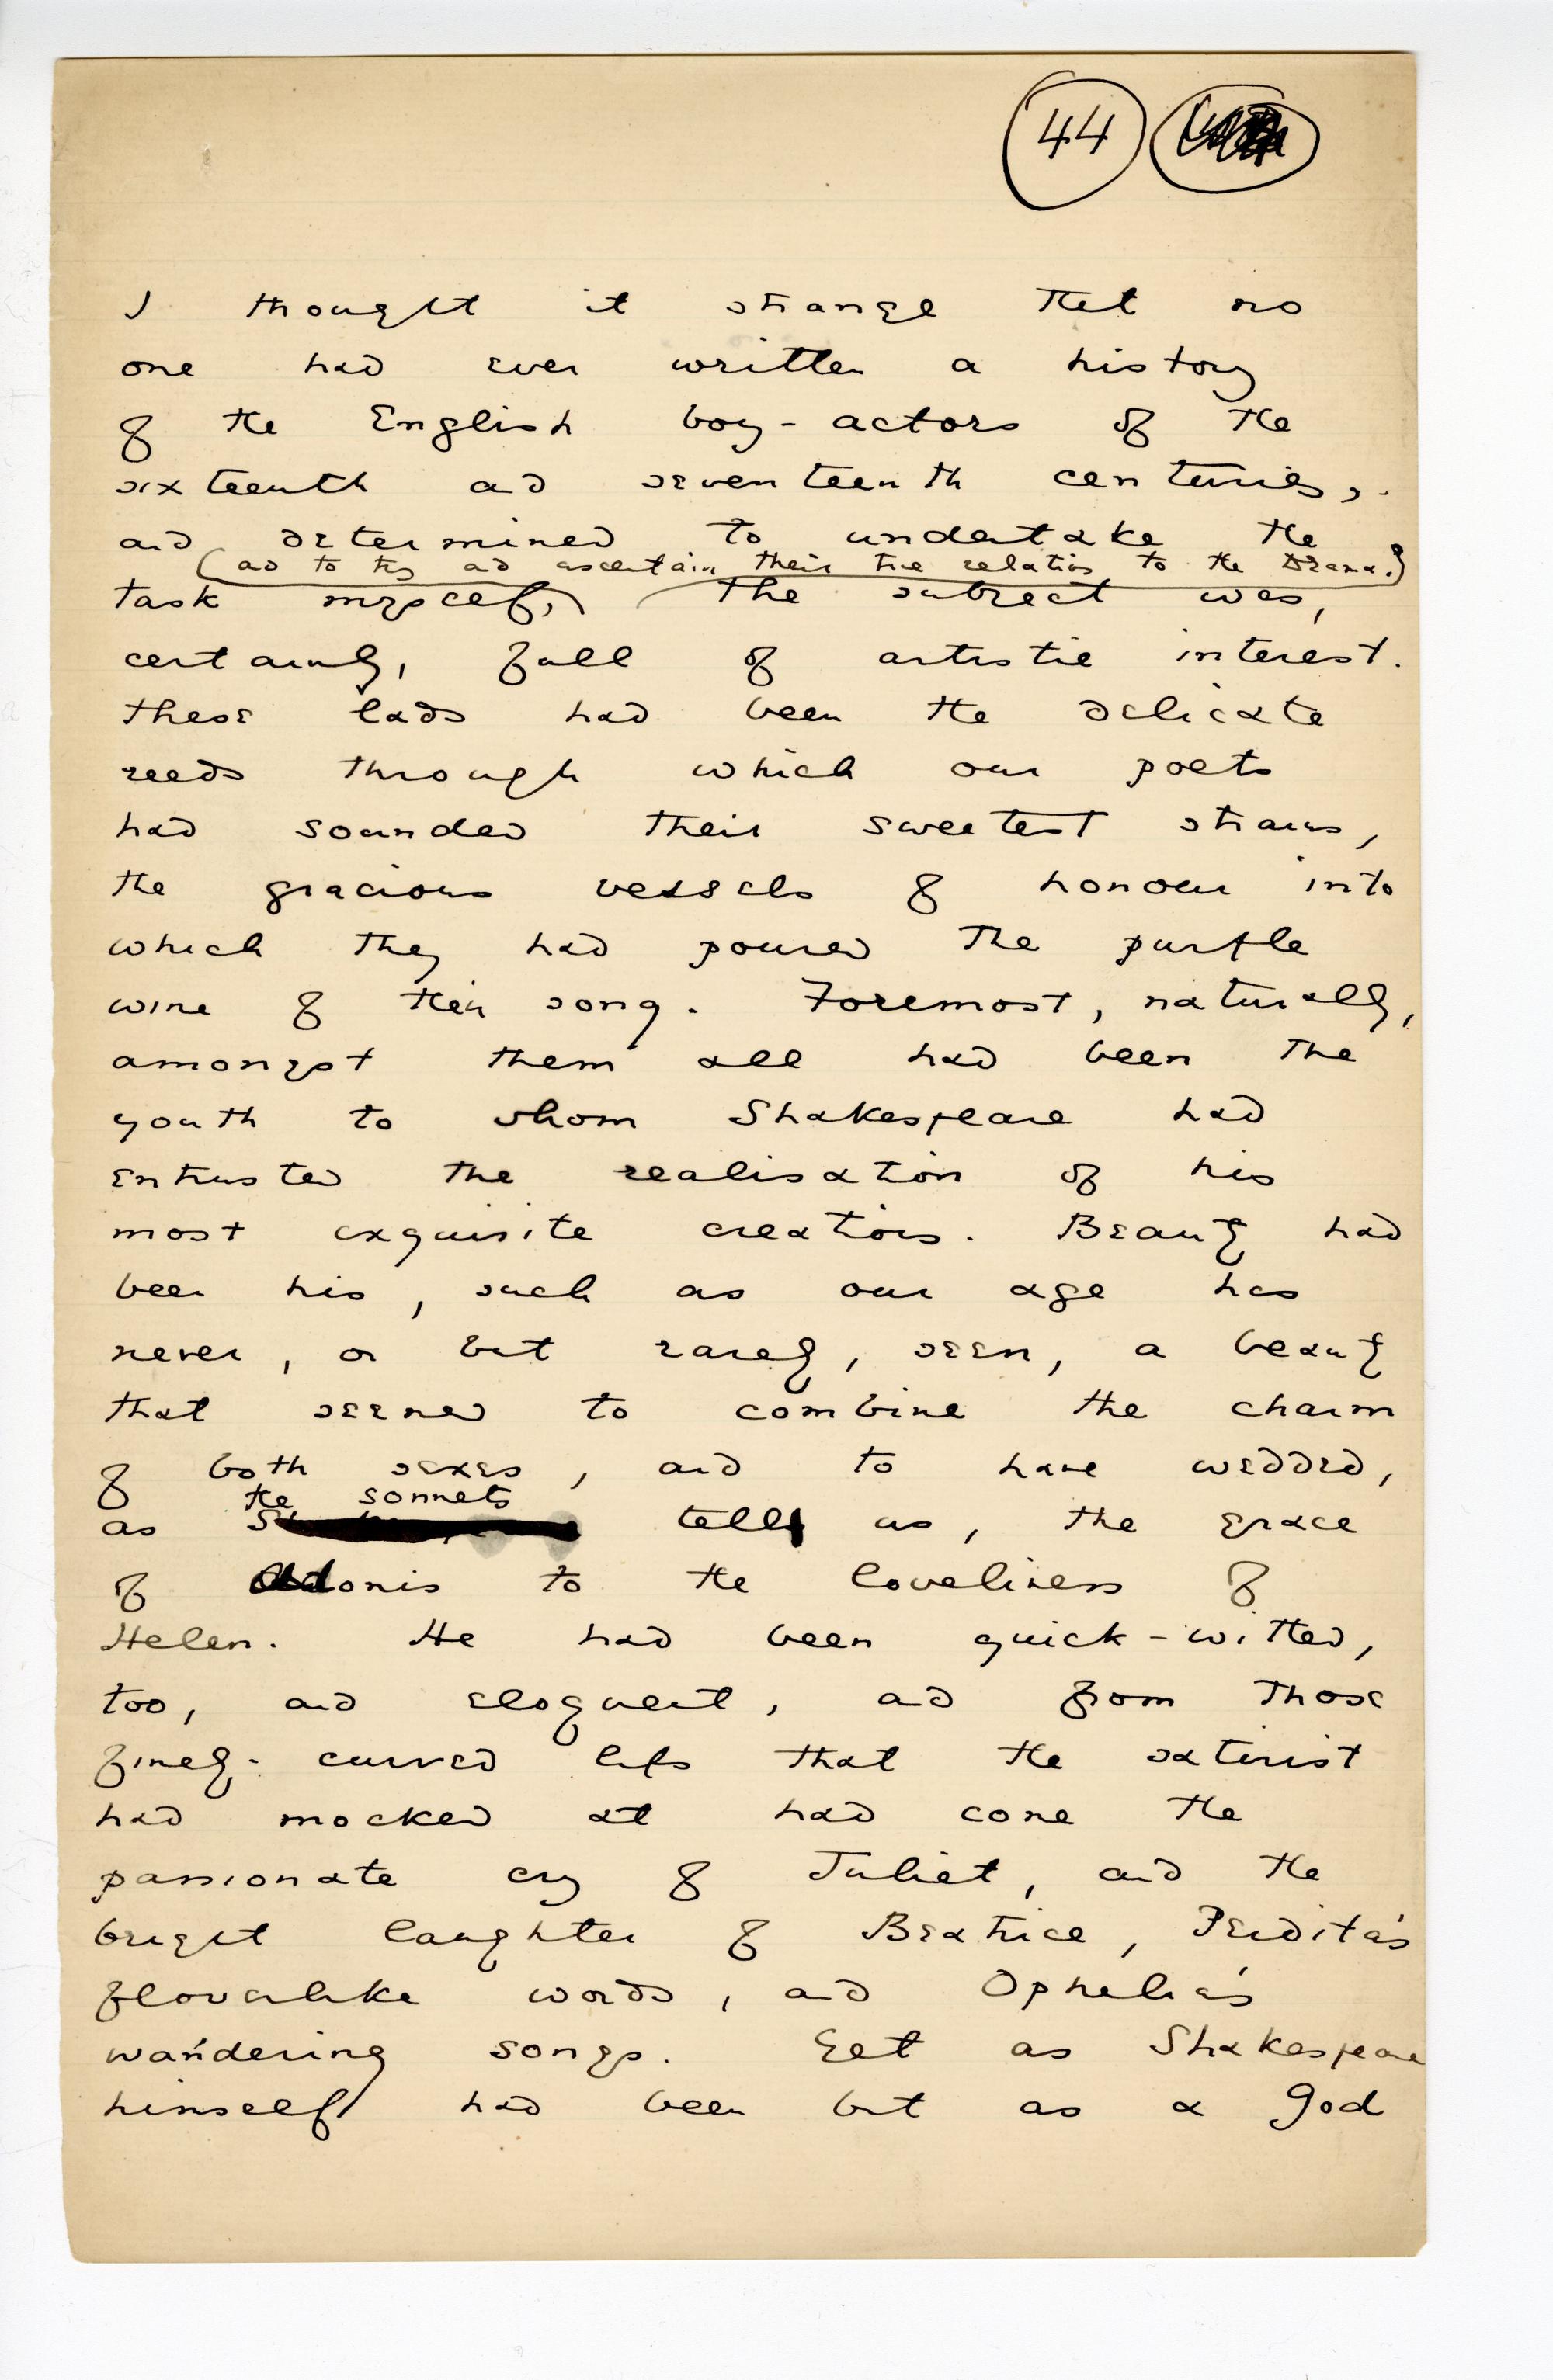 Folio 44 is a handwritten notebook page with no cutouts. The original folio number which seems to be "43" is scrawled out and "44" is written beside it in Wilde's hand. 